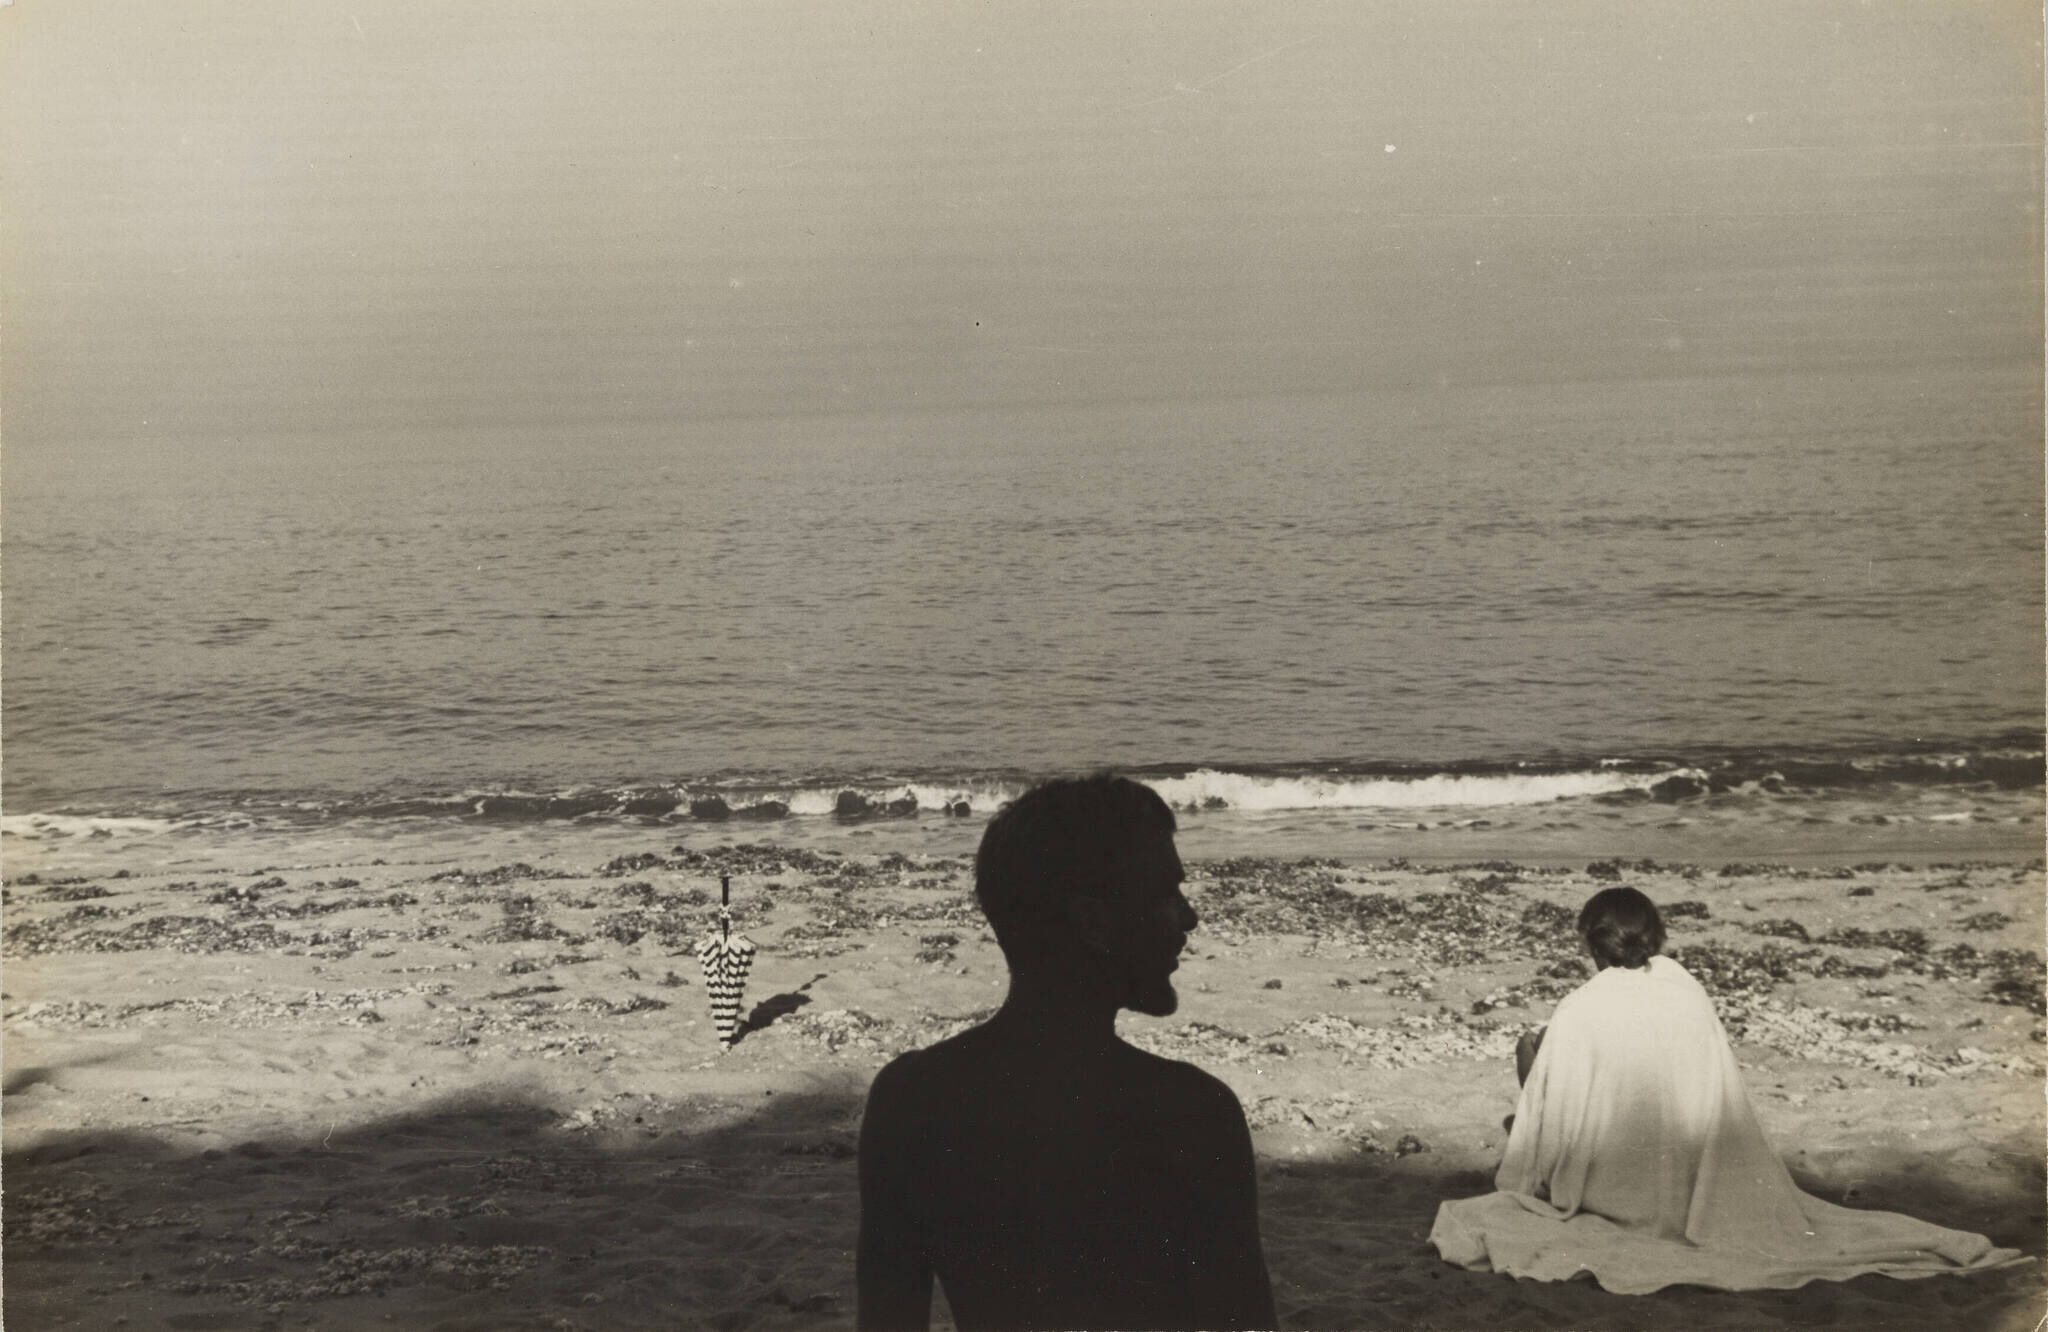 A black and white photograph of two people on the beach. The man is in the center of the frame in total shadow and silhouette, while the woman sits on the sand in a flowy white garment with her back to the viewer. 